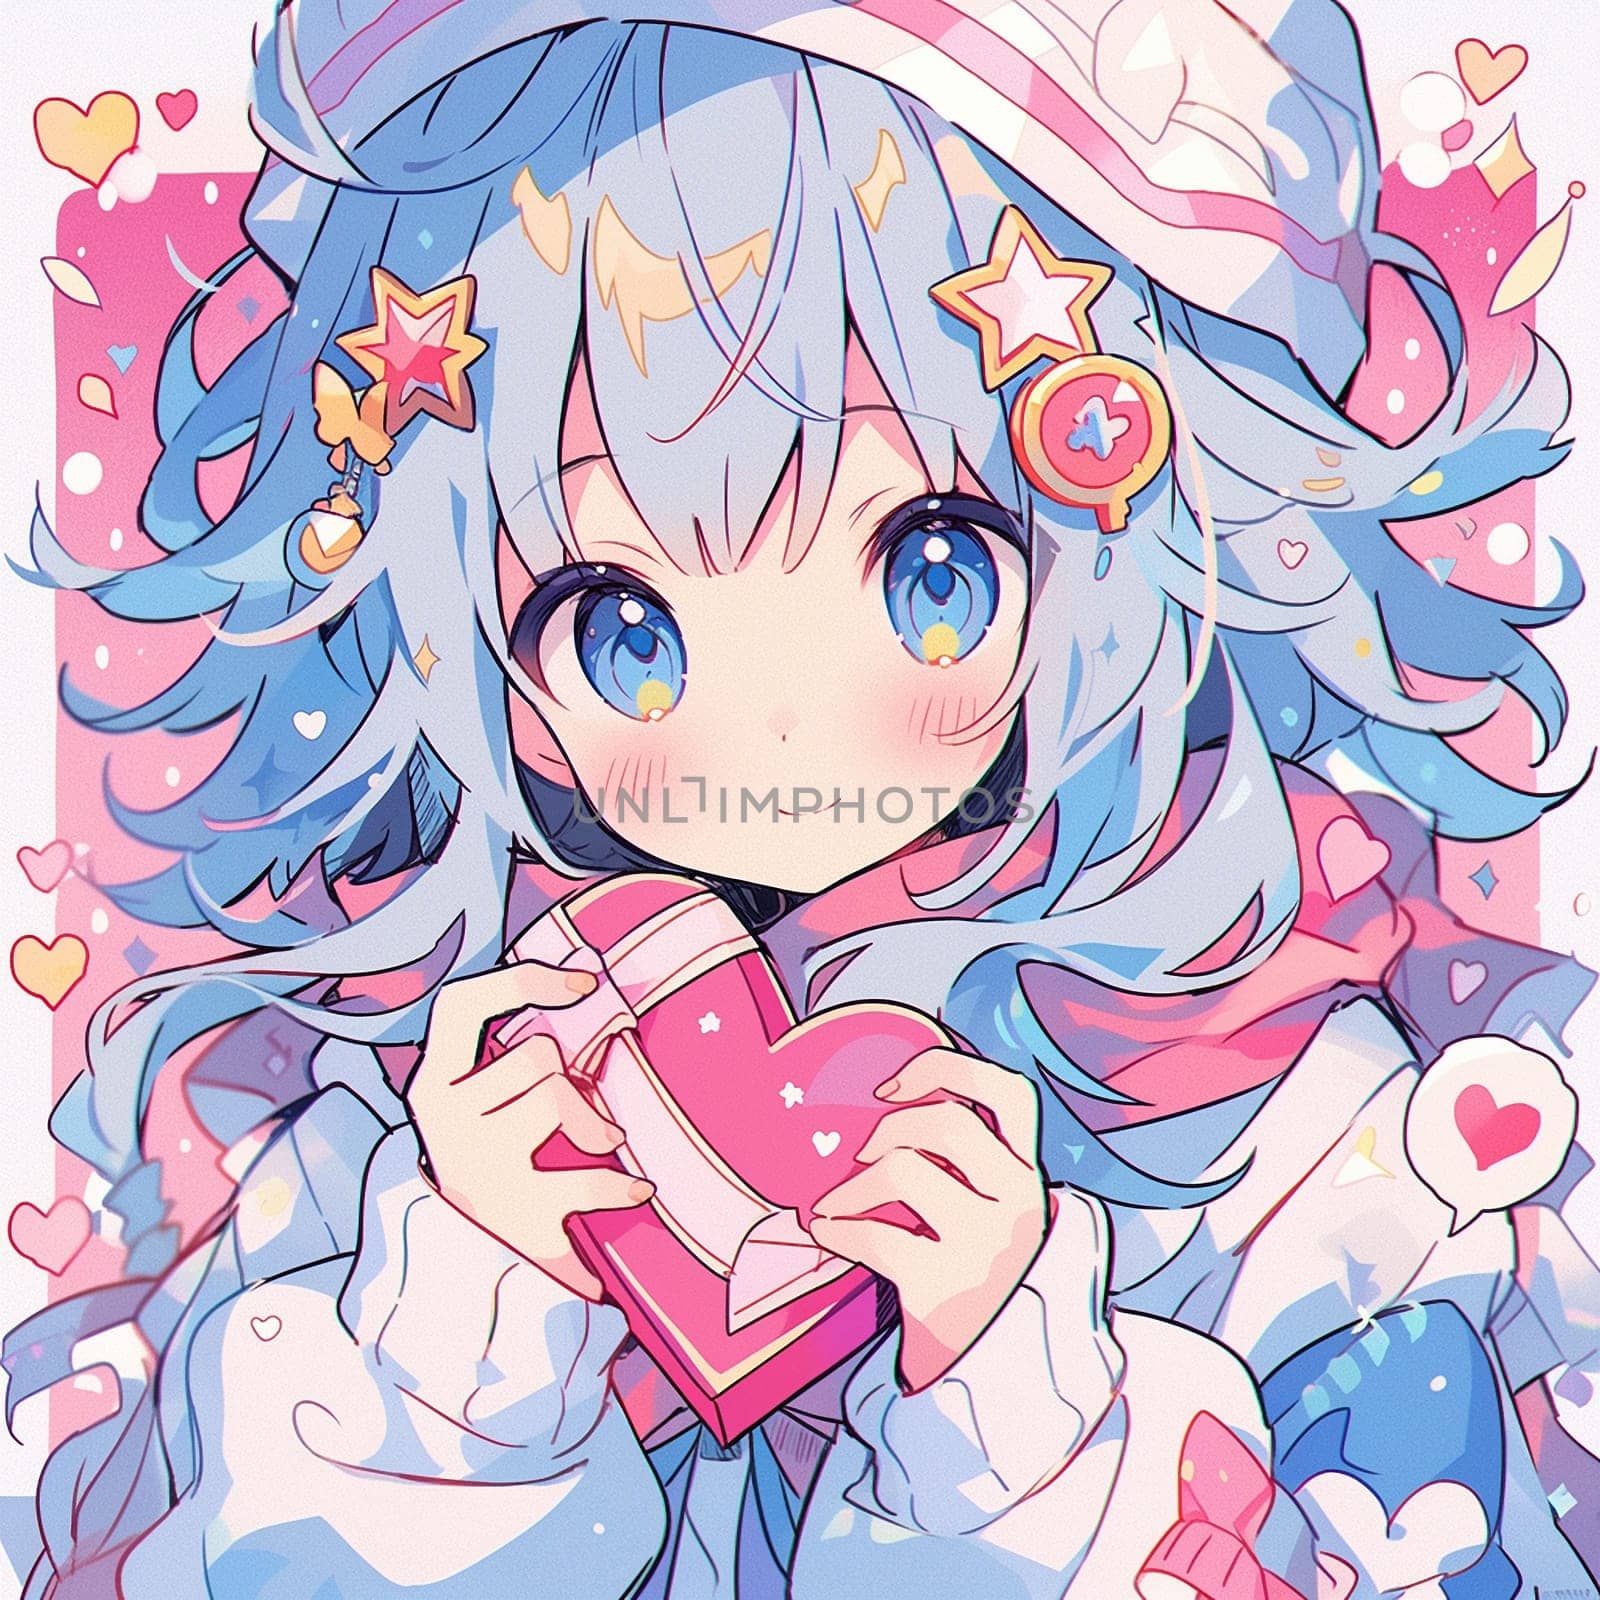 A beautiful girl full of love in the Anime style. A beautiful drawing for Valentine's Day. High quality illustration